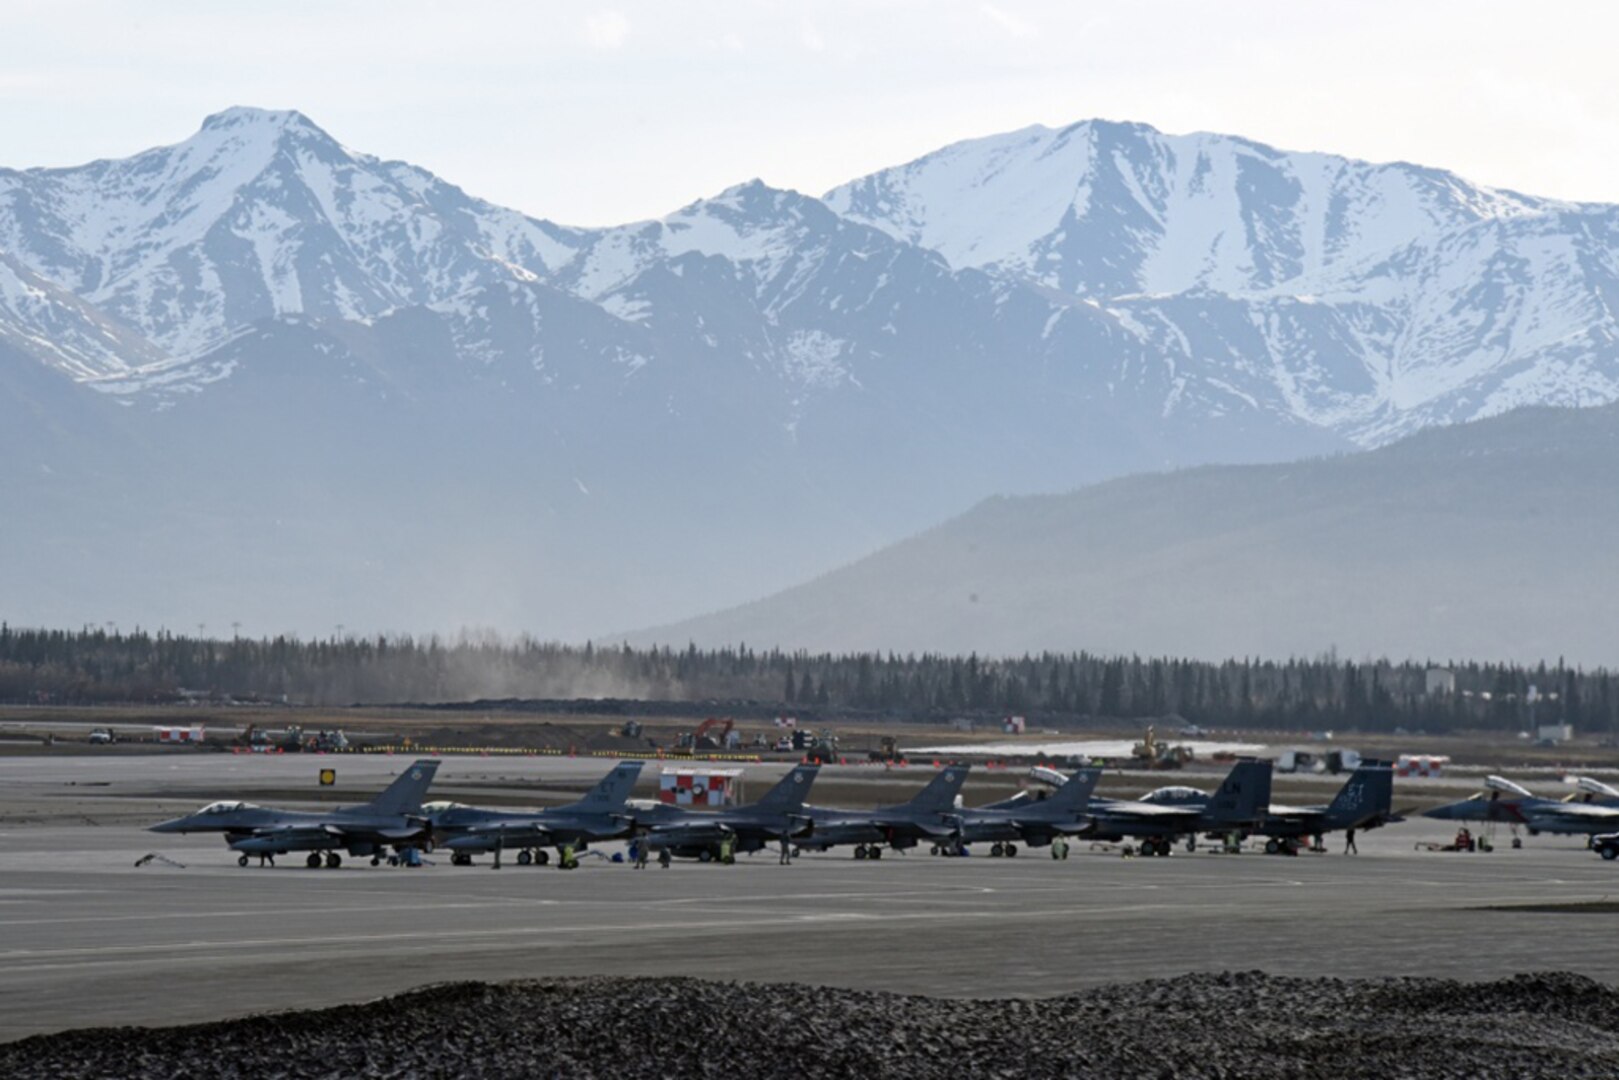 Military personnel perform safety inspections on dozens of aircraft on the Joint Base Elmendorf-Richardson, Alaska, flightline ramp before takeoff during Exercise Northern Edge 2017. Northern Edge is Alaska's largest and premier joint training exercise designed to practice operations, techniques and procedures as well as enhance interoperability among the services. Thousands of participants from all the services-Airmen, Soldiers, Sailors, Marines and Coast Guard personnel from active duty, Reserve and National Guard units-are involved.